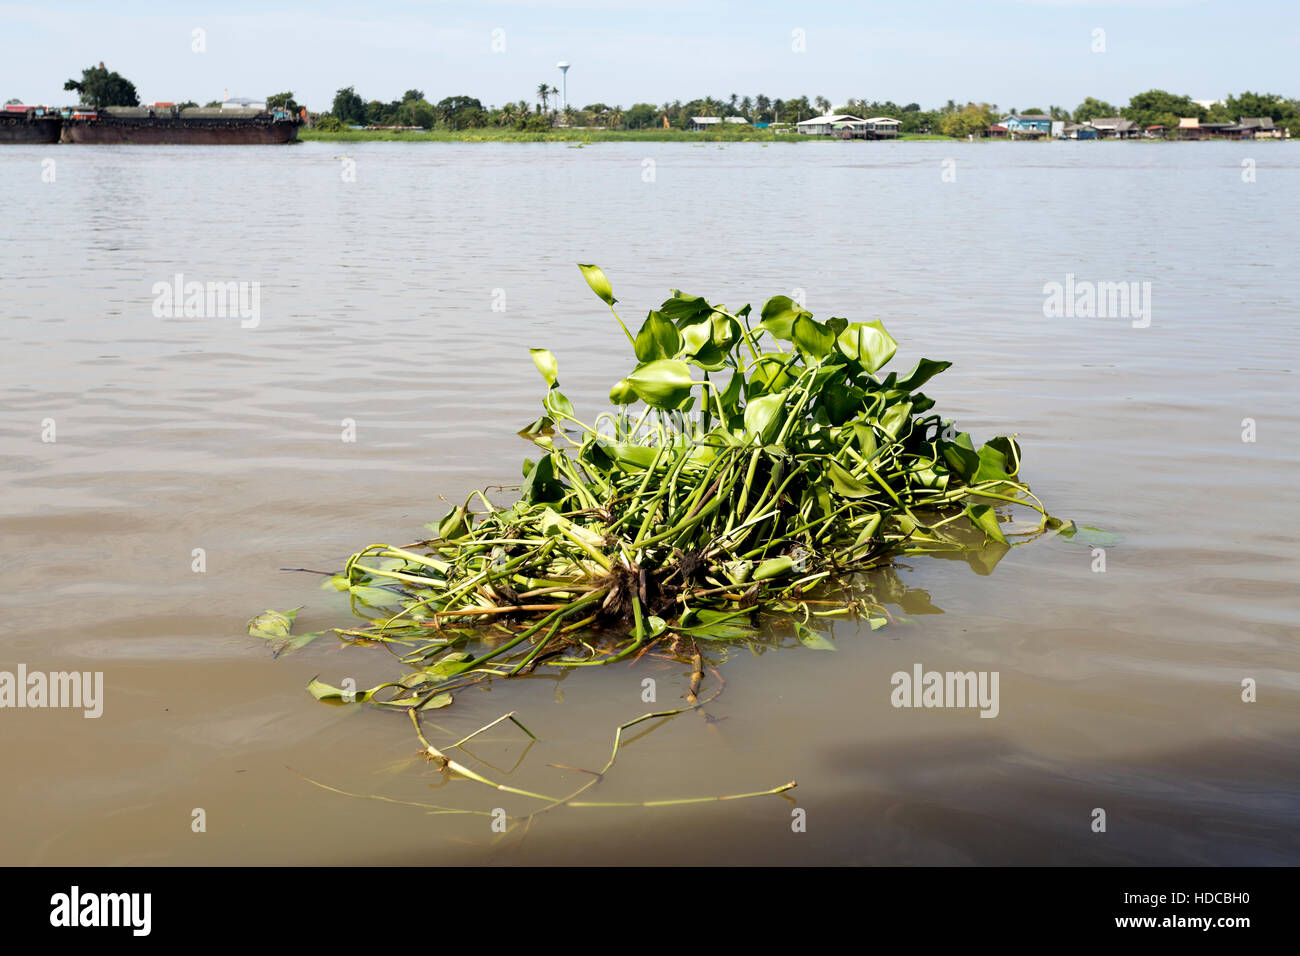 Eichhornia crassipes, or water hyacinth, is a free-floating perennial aquatic plant (hydrophyte) native to tropical South America and considered as an Stock Photo